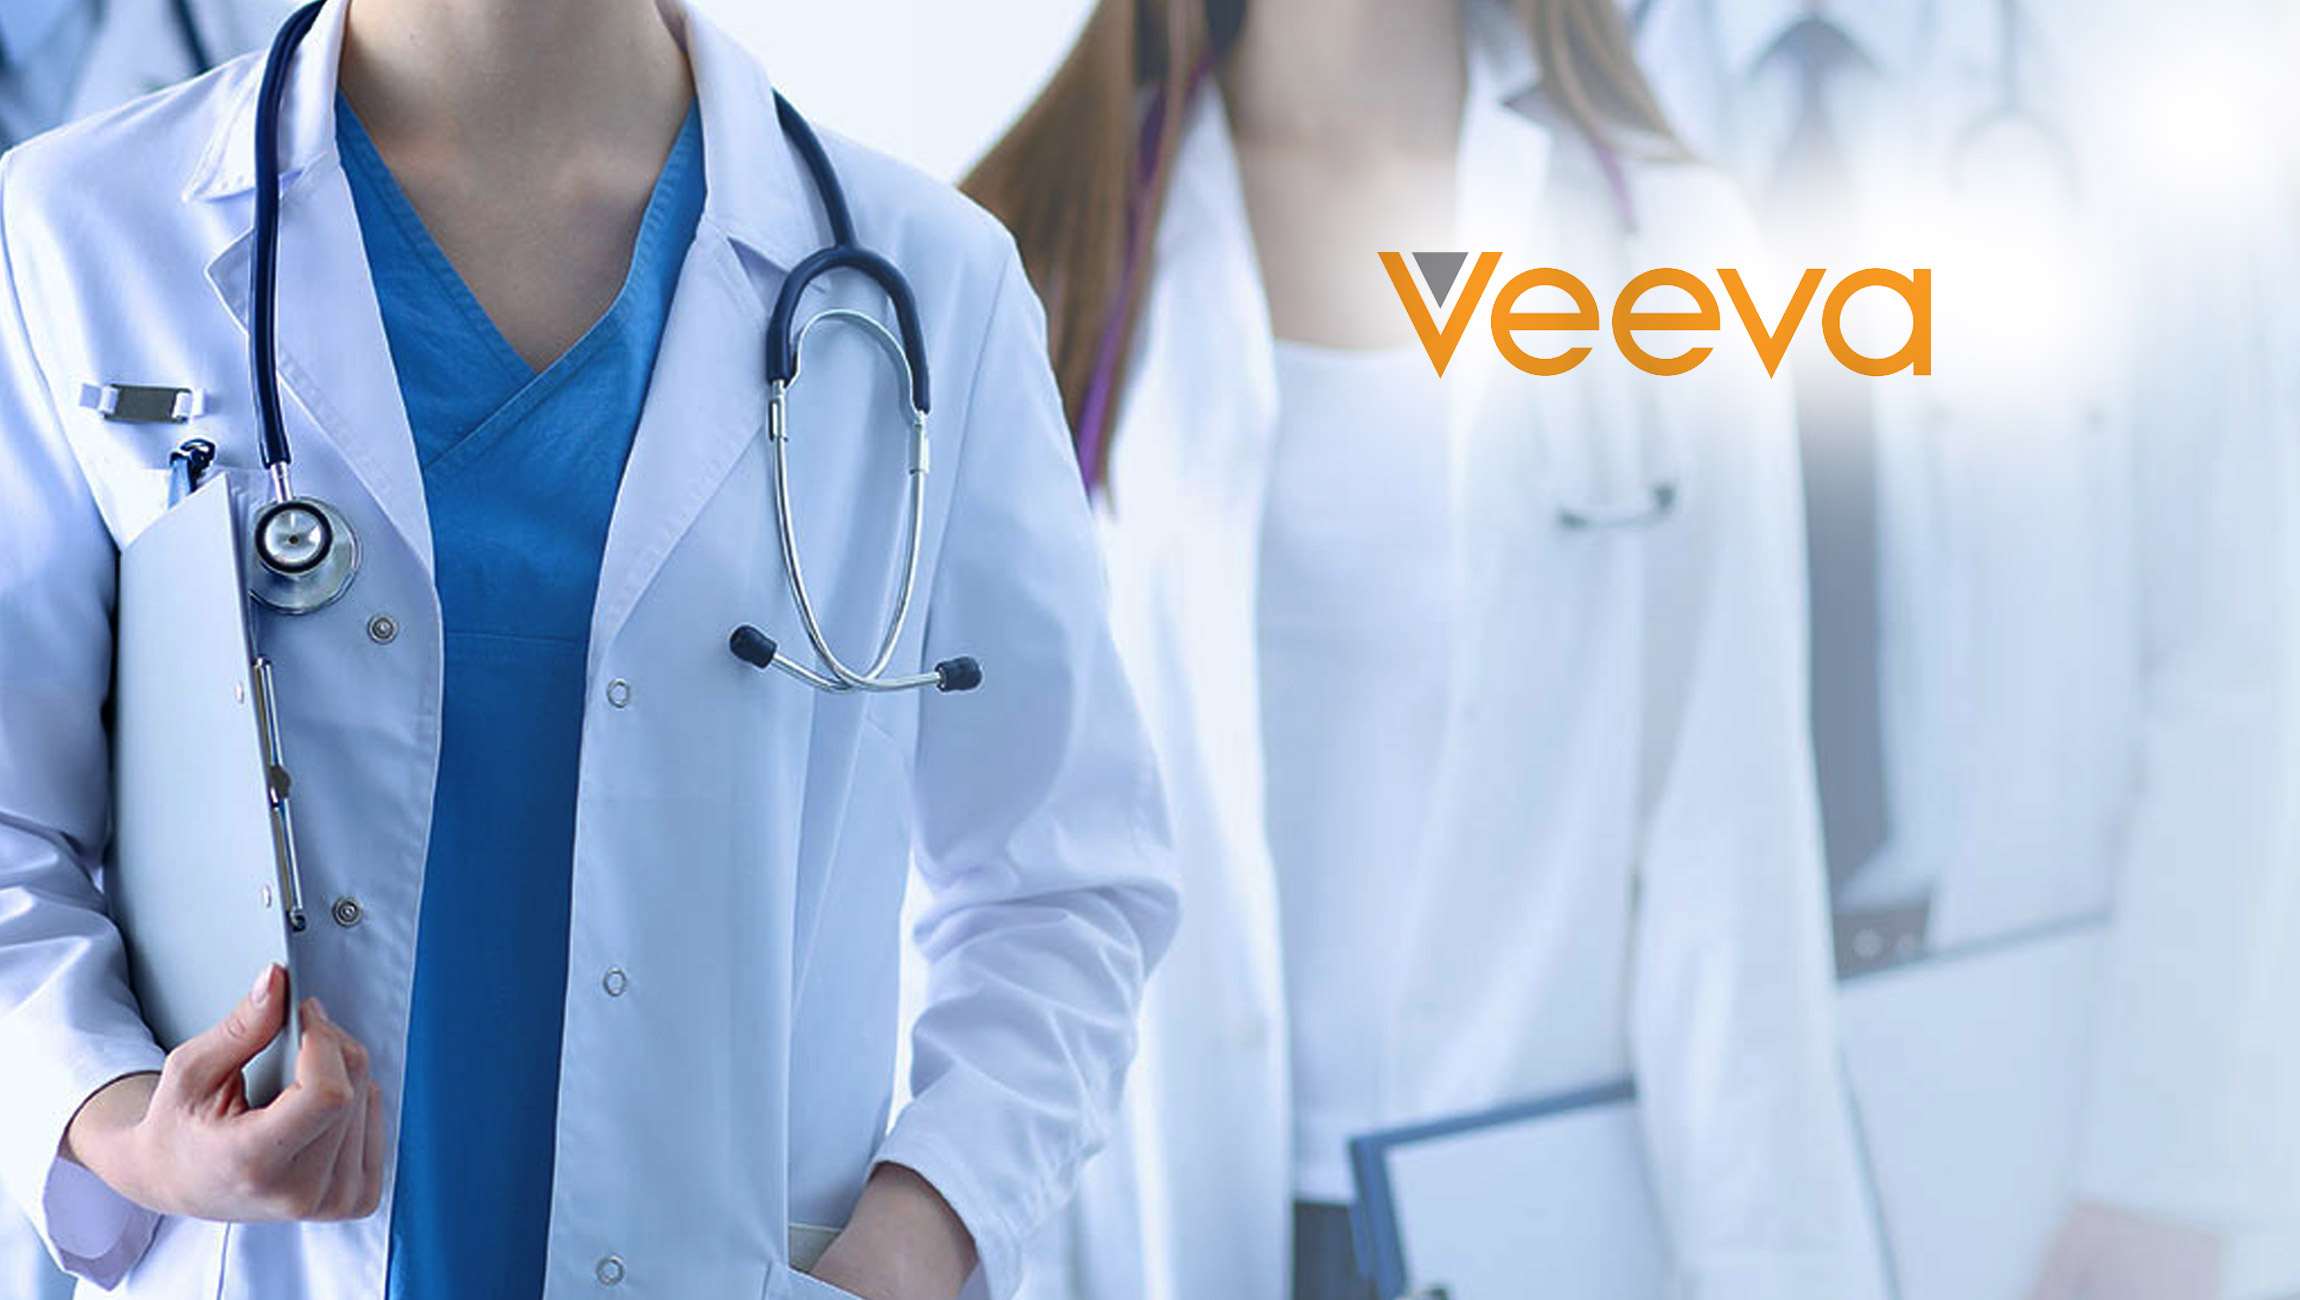 Veeva Unveils Powerful New Digital Tools to Enable the Future of On Demand Physician Engagement